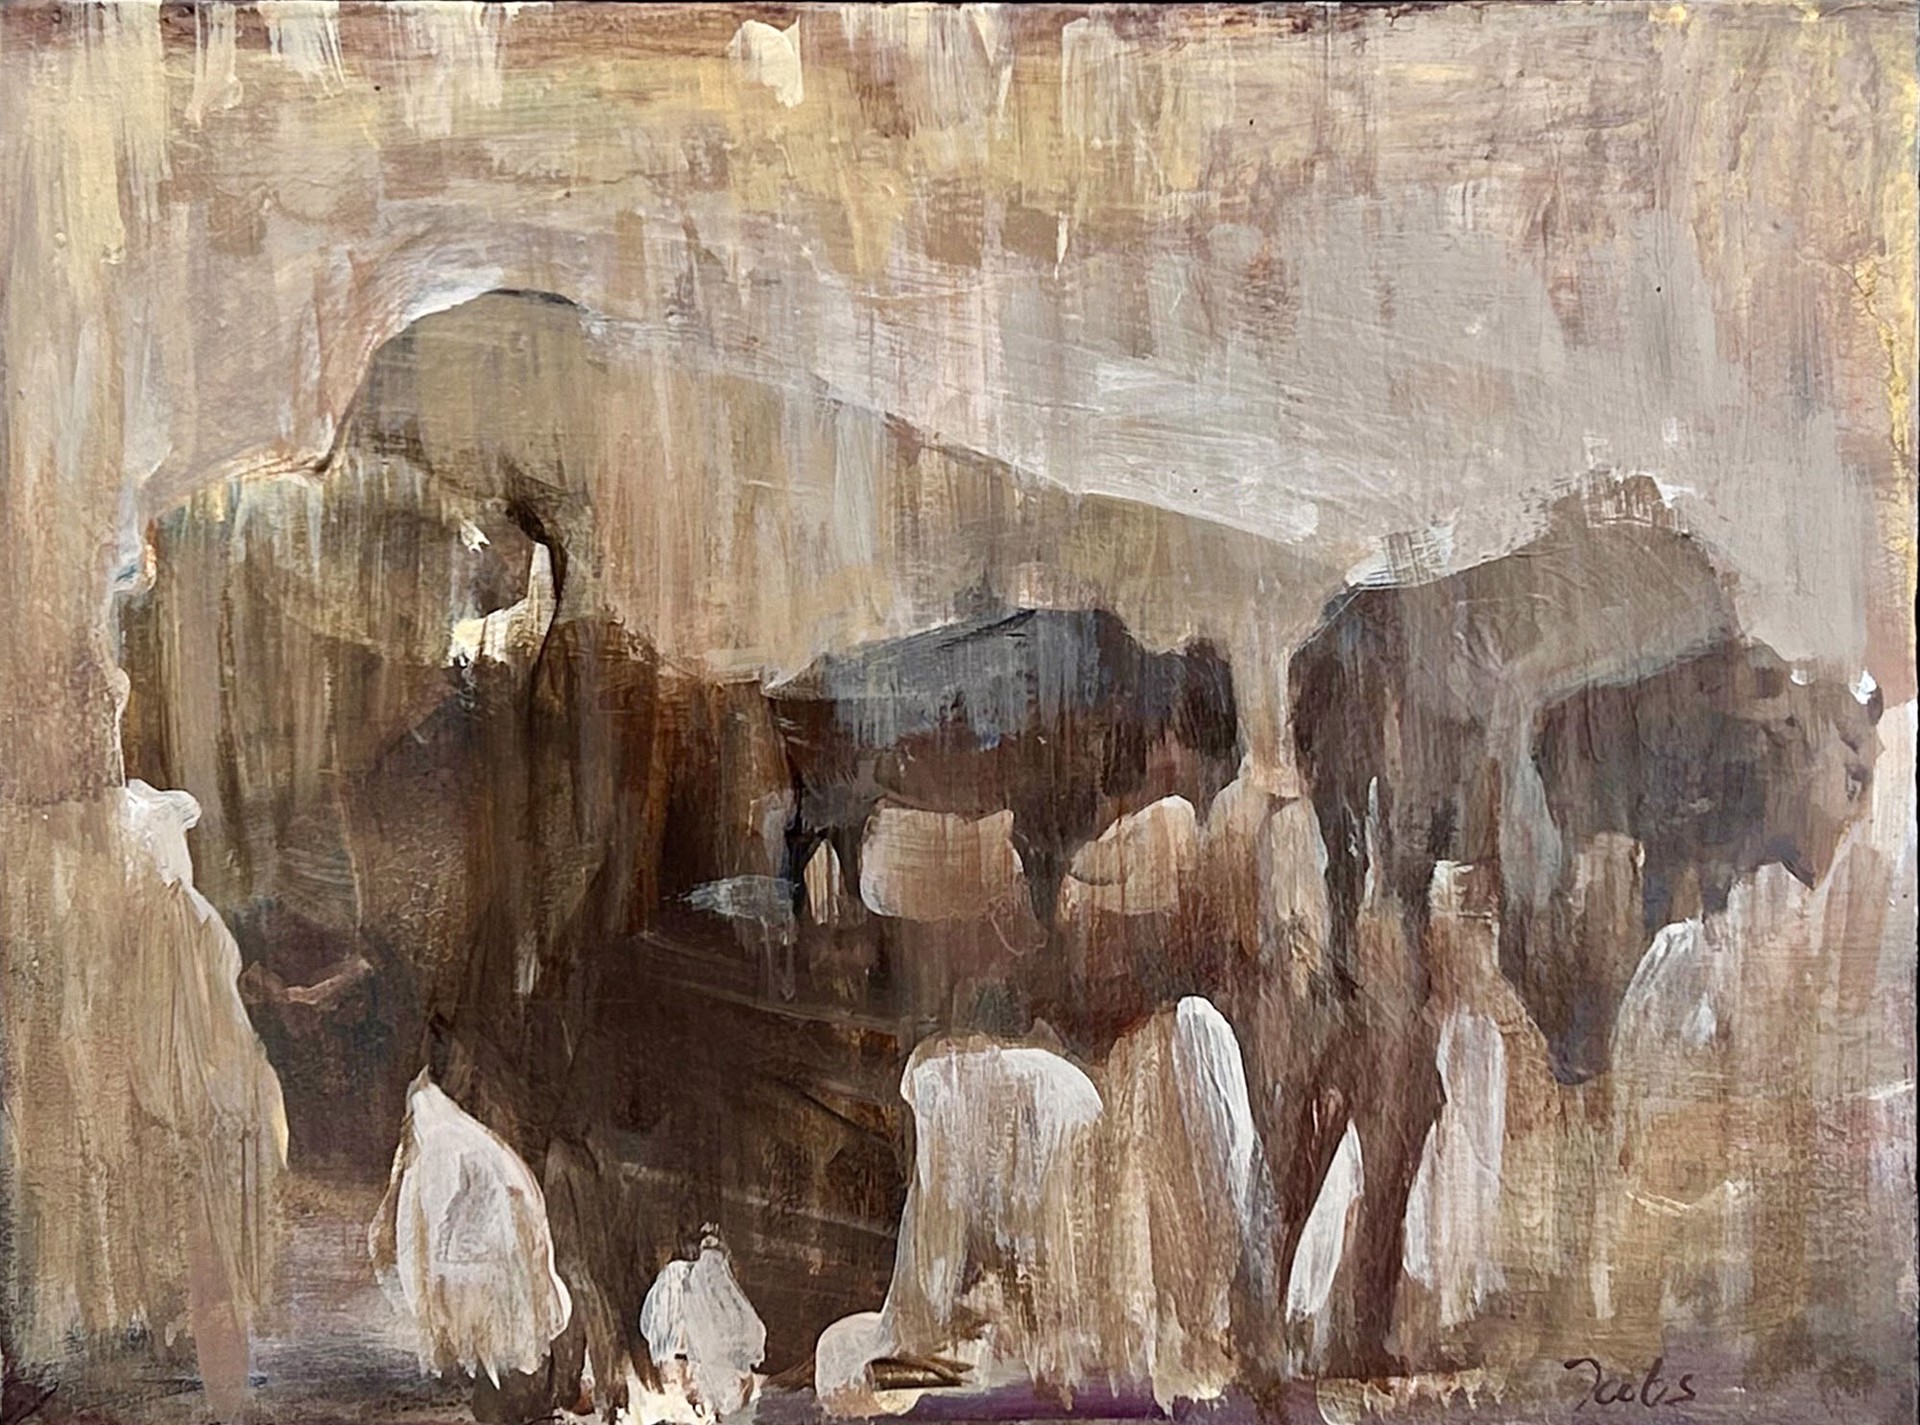 Original Acrylic Painting By Taryn Boals Featuring Transparent Overlapping Bison Silhouettes In Neutral Color Palette 